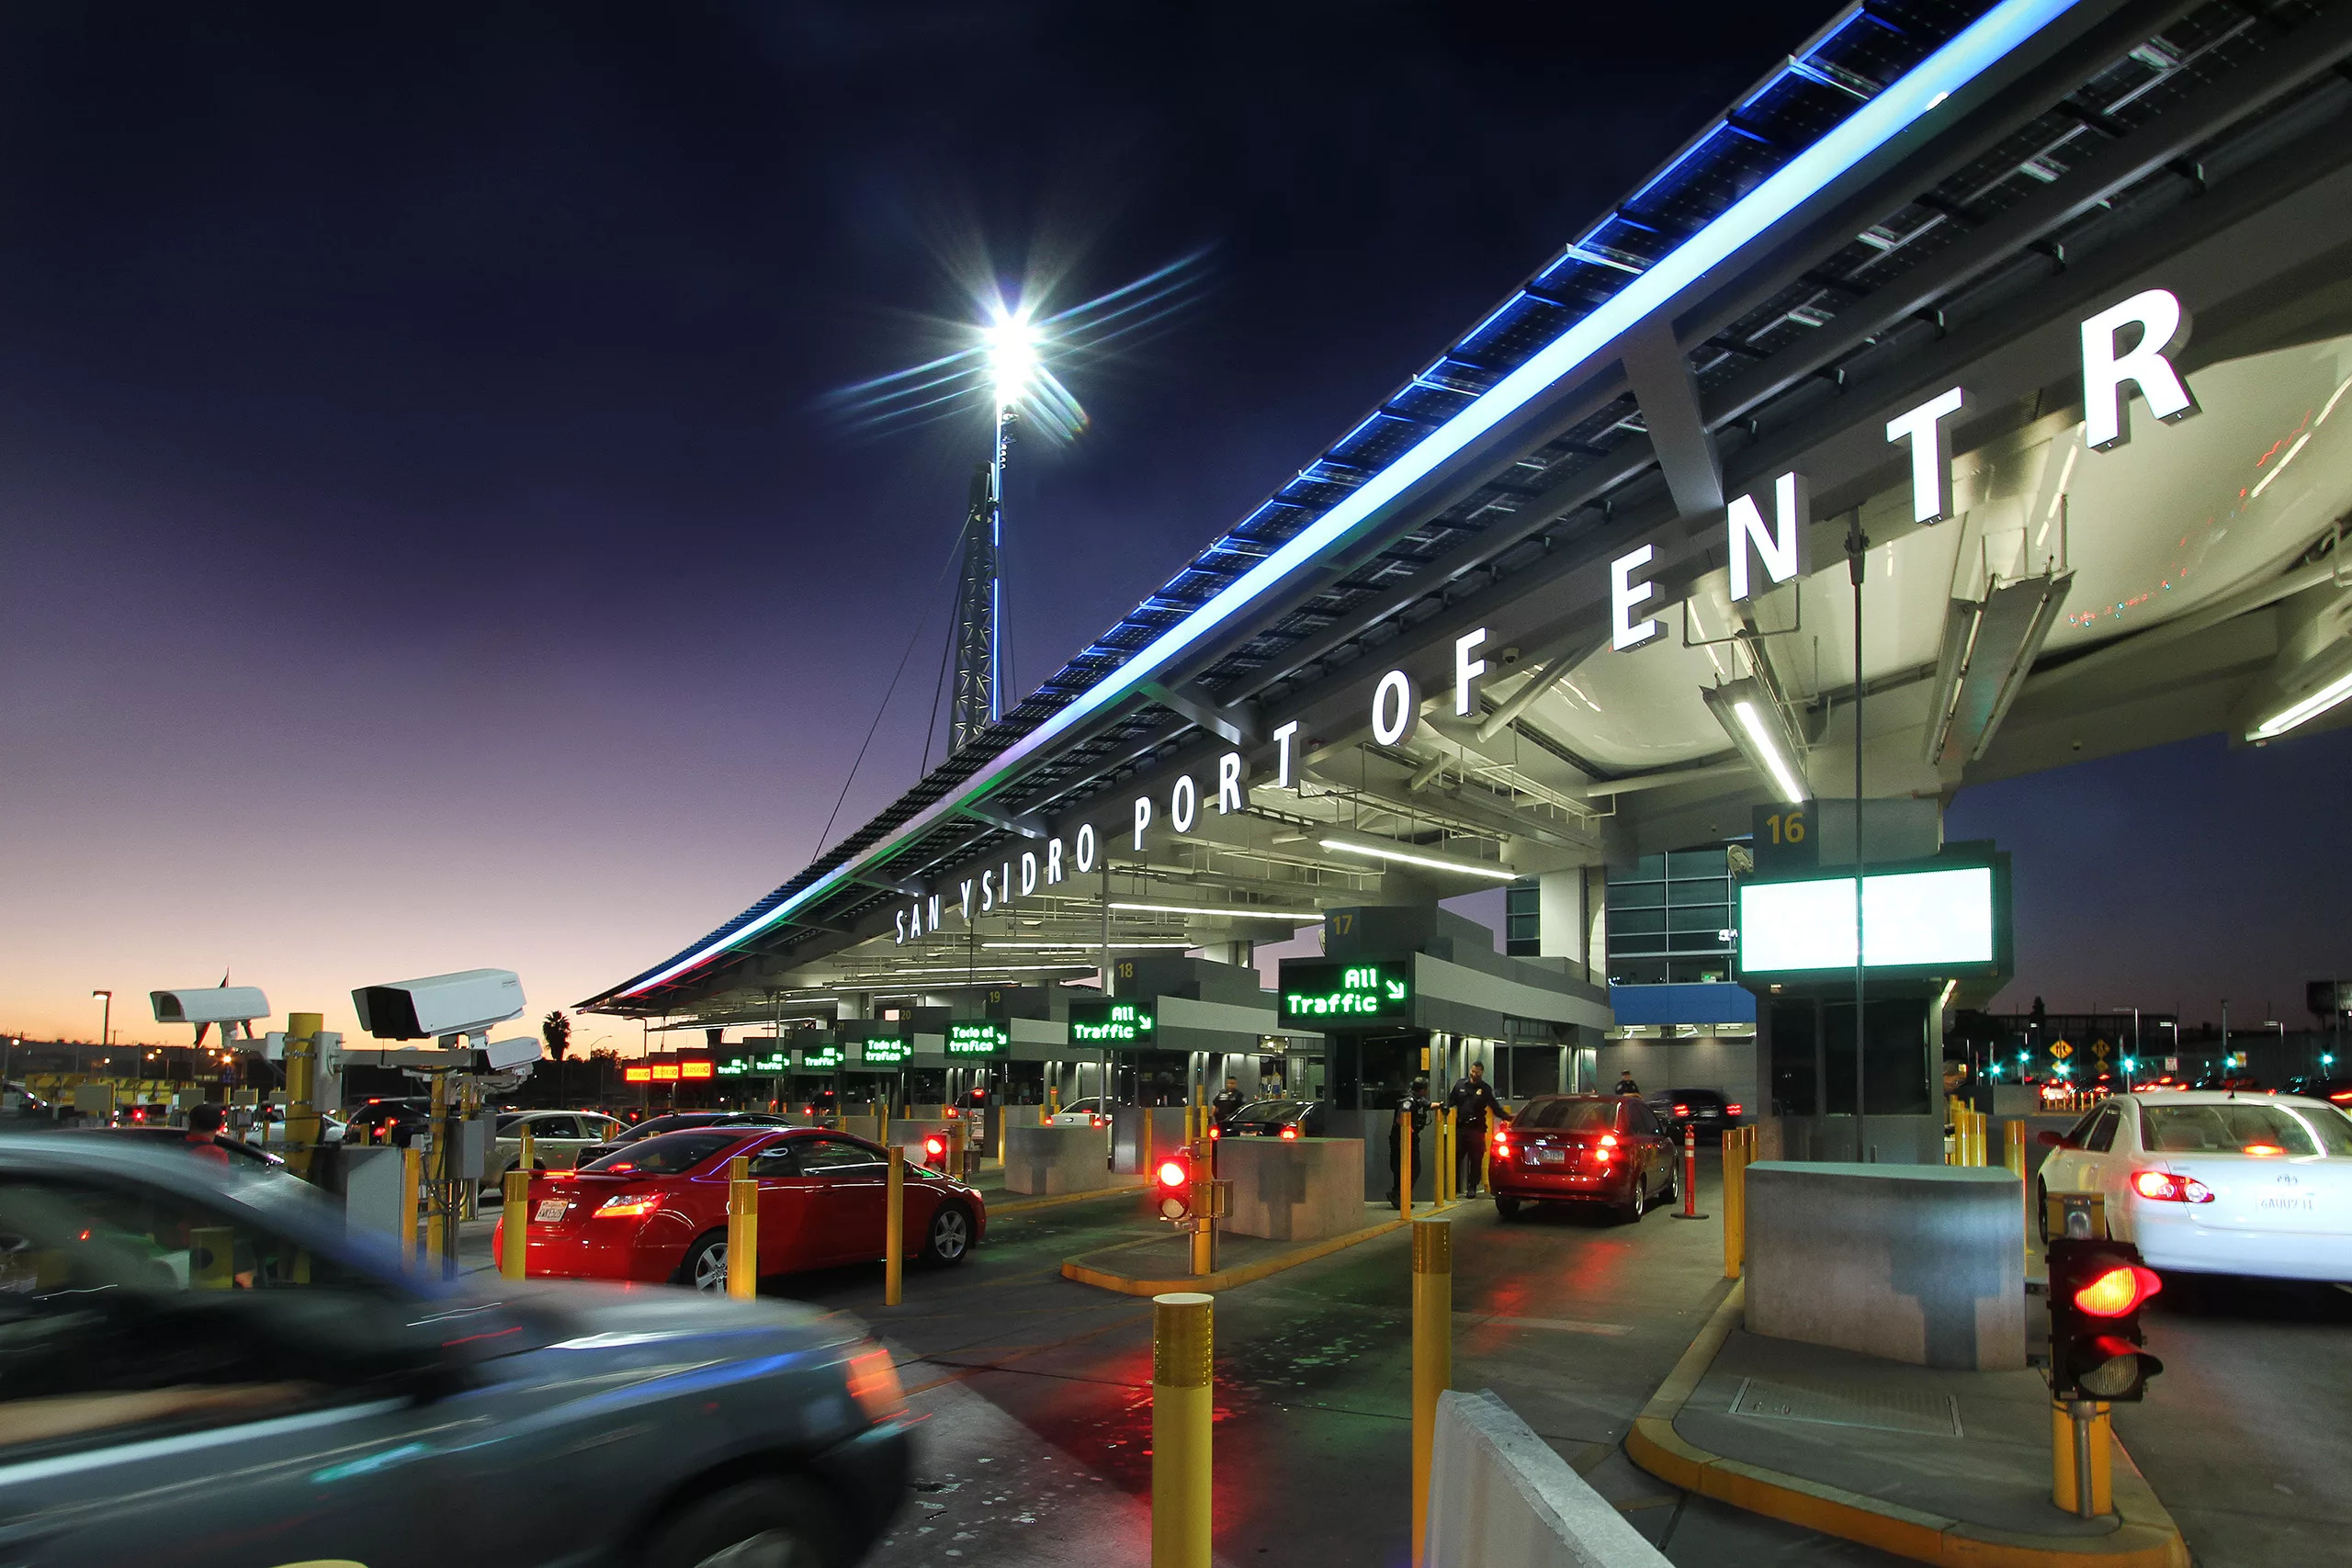 Exterior twilight view of the vehicles lined up in lanes of the San Ysidro U.S. Land Port of Entry with illuminated signage, security cameras, and booths for officers